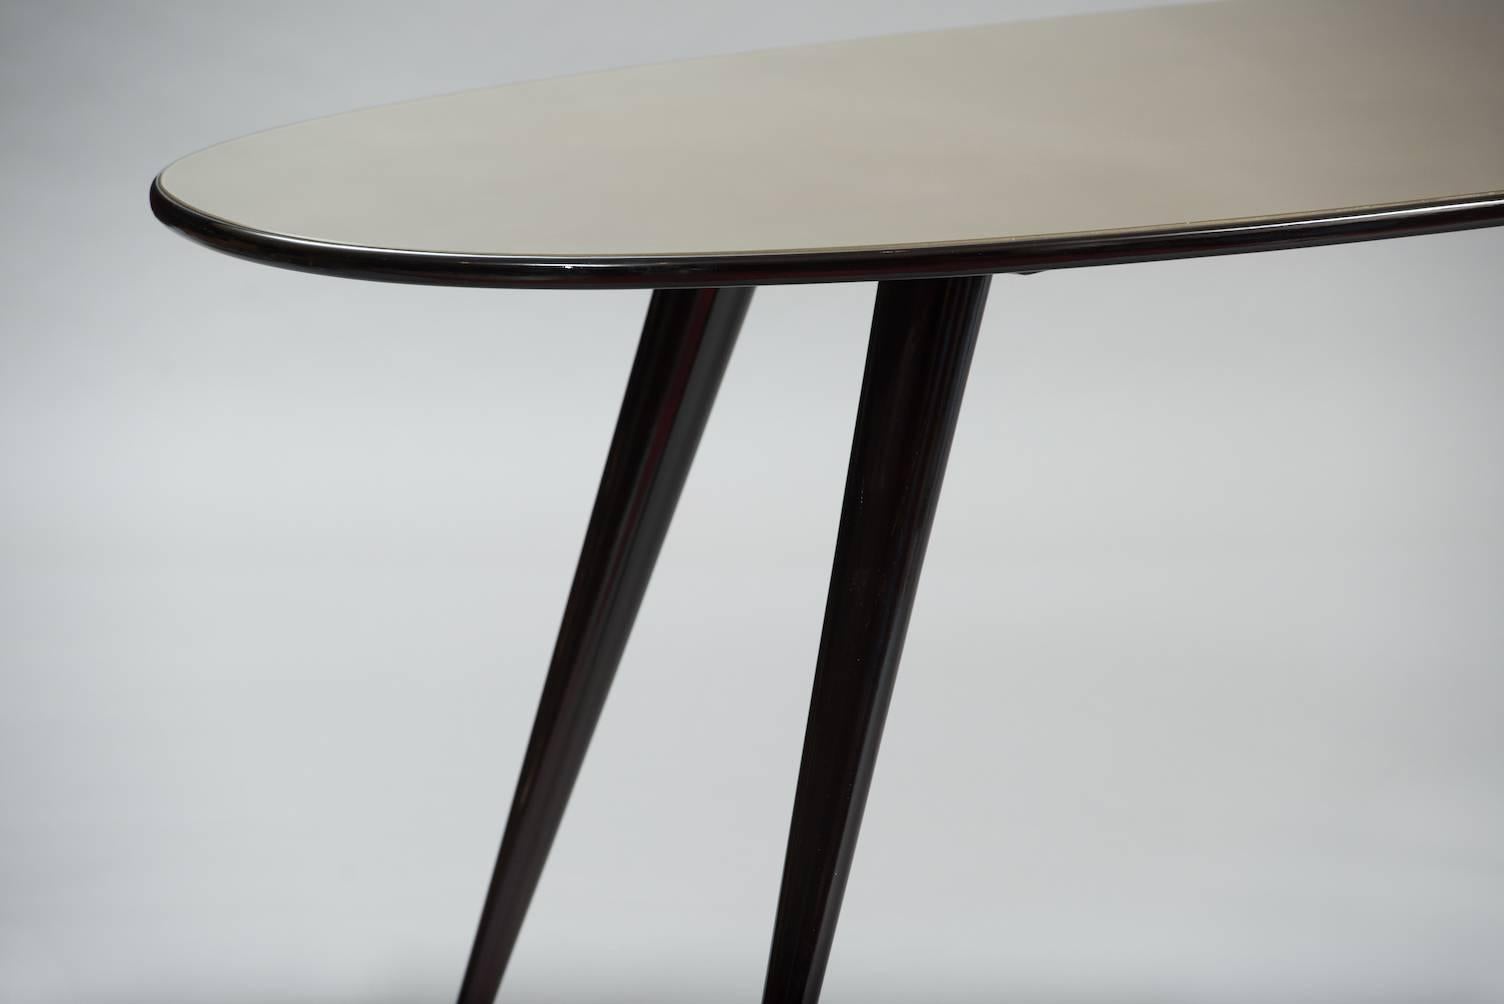 Ebonized wood oval dining table with a glass lacquered top.